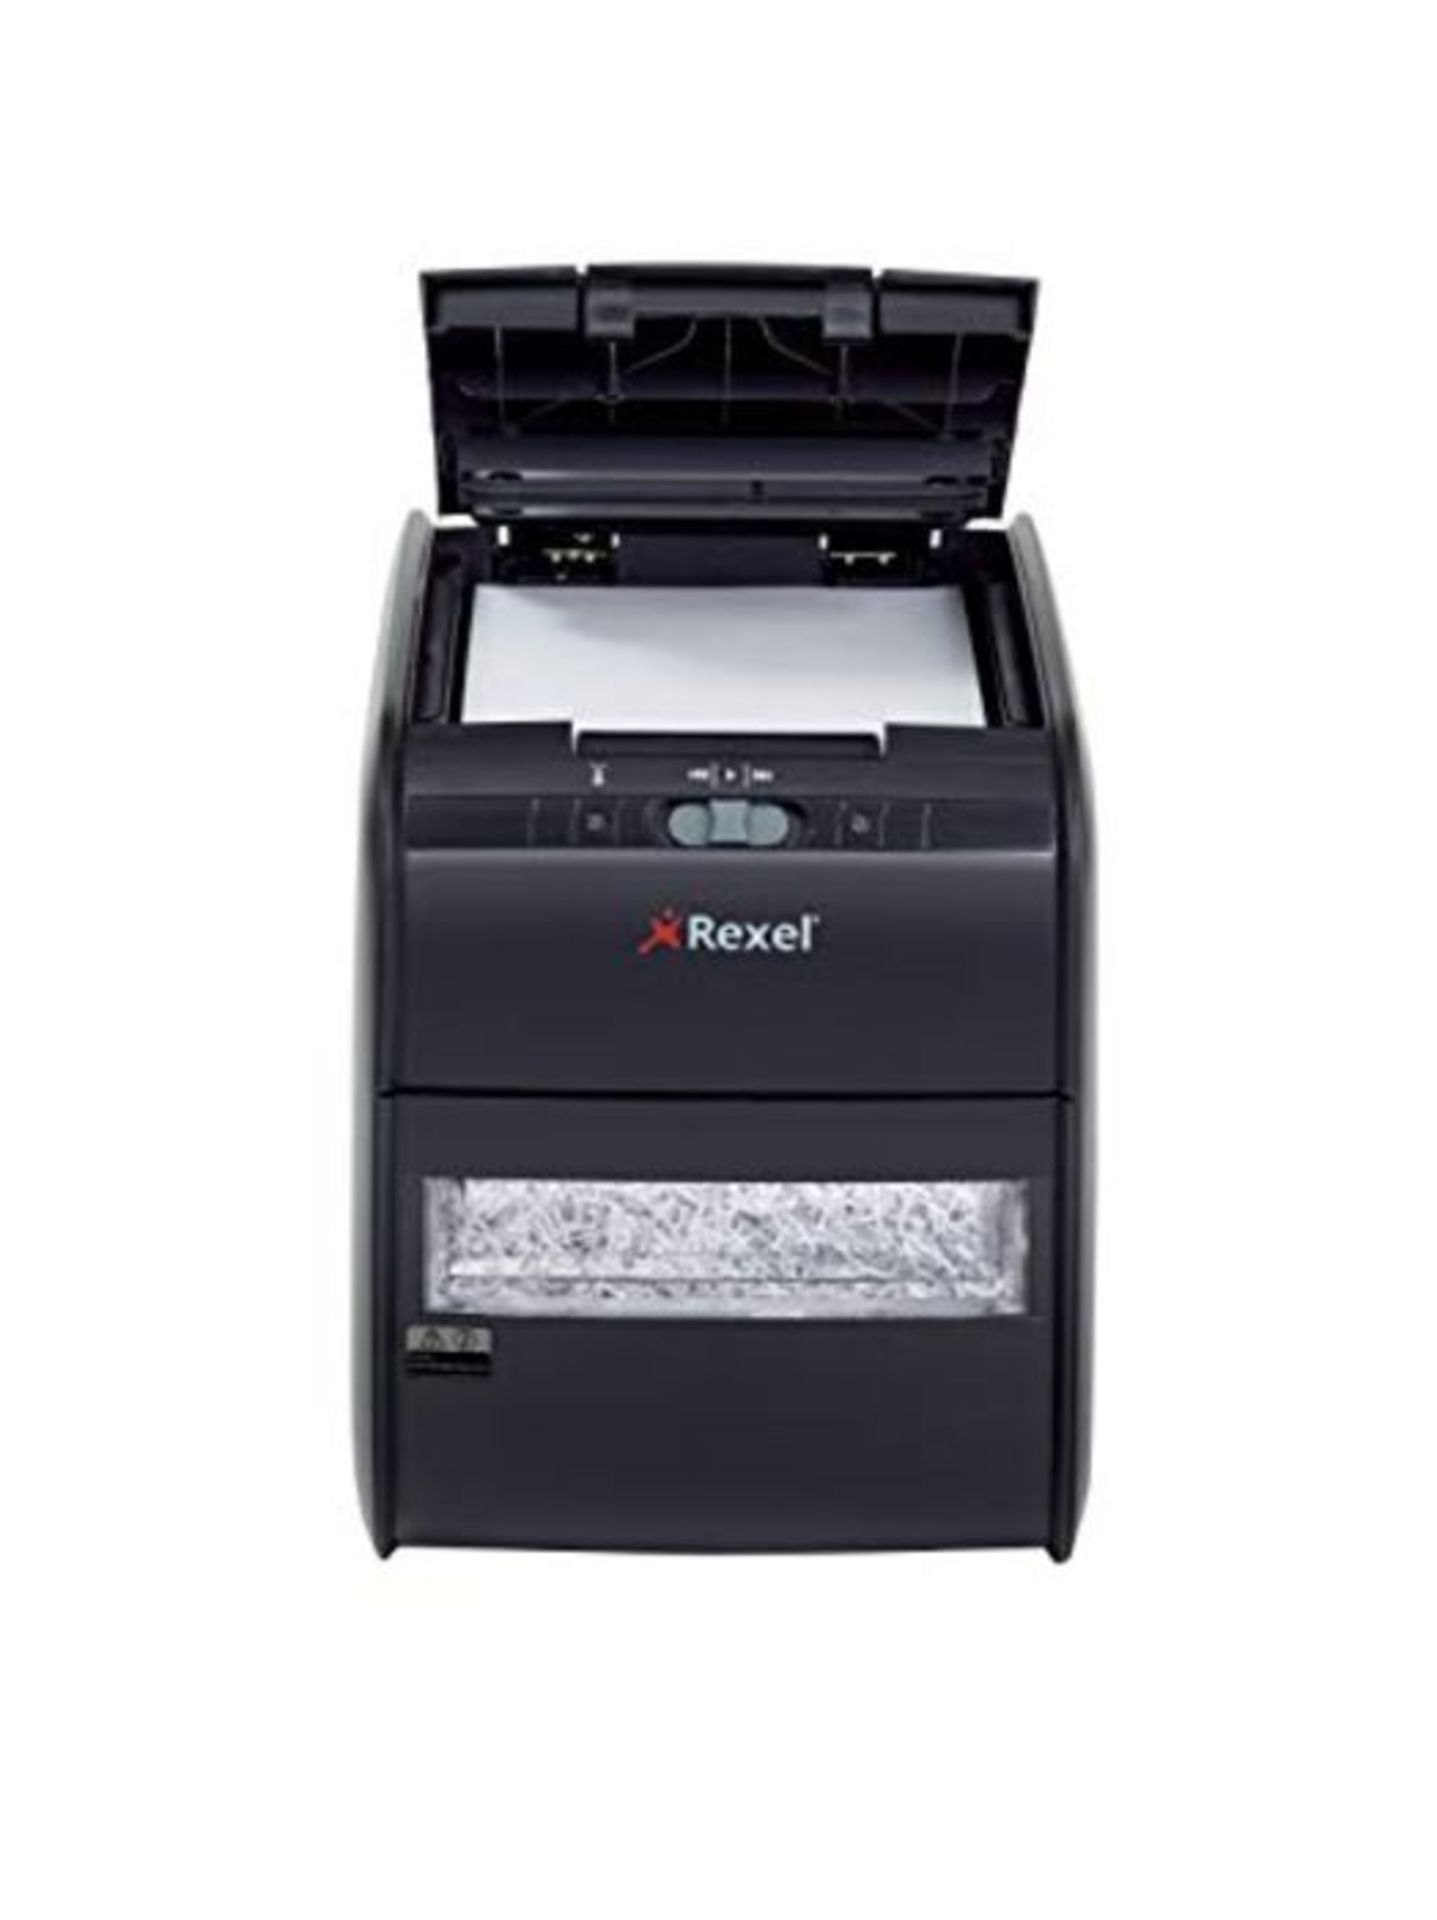 RRP £109.00 Rexel Auto 60X Auto Feed 30 Sheet Cross Cut Paper Shredder for Home or Home Office (o